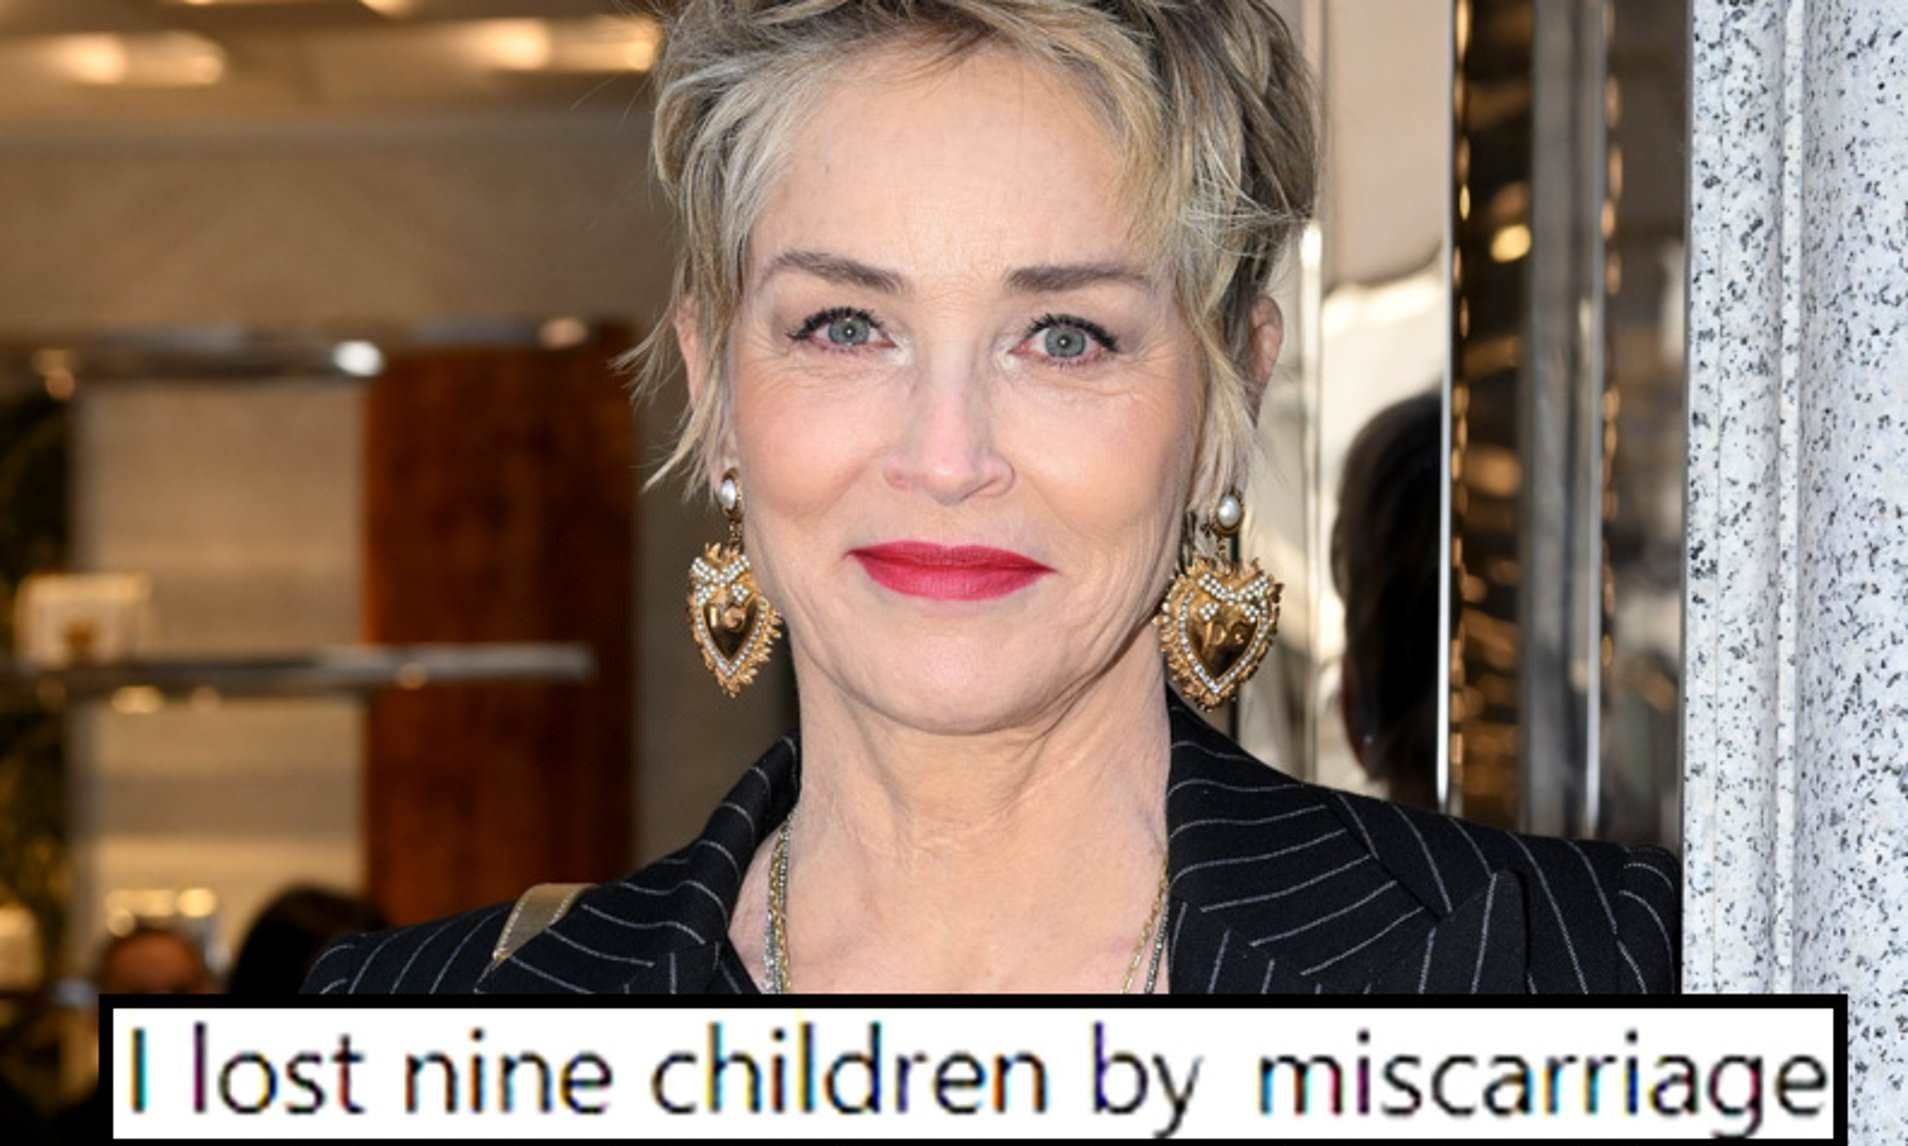 Sharon Stone shares that she has 'lost 9 children' through miscarriages